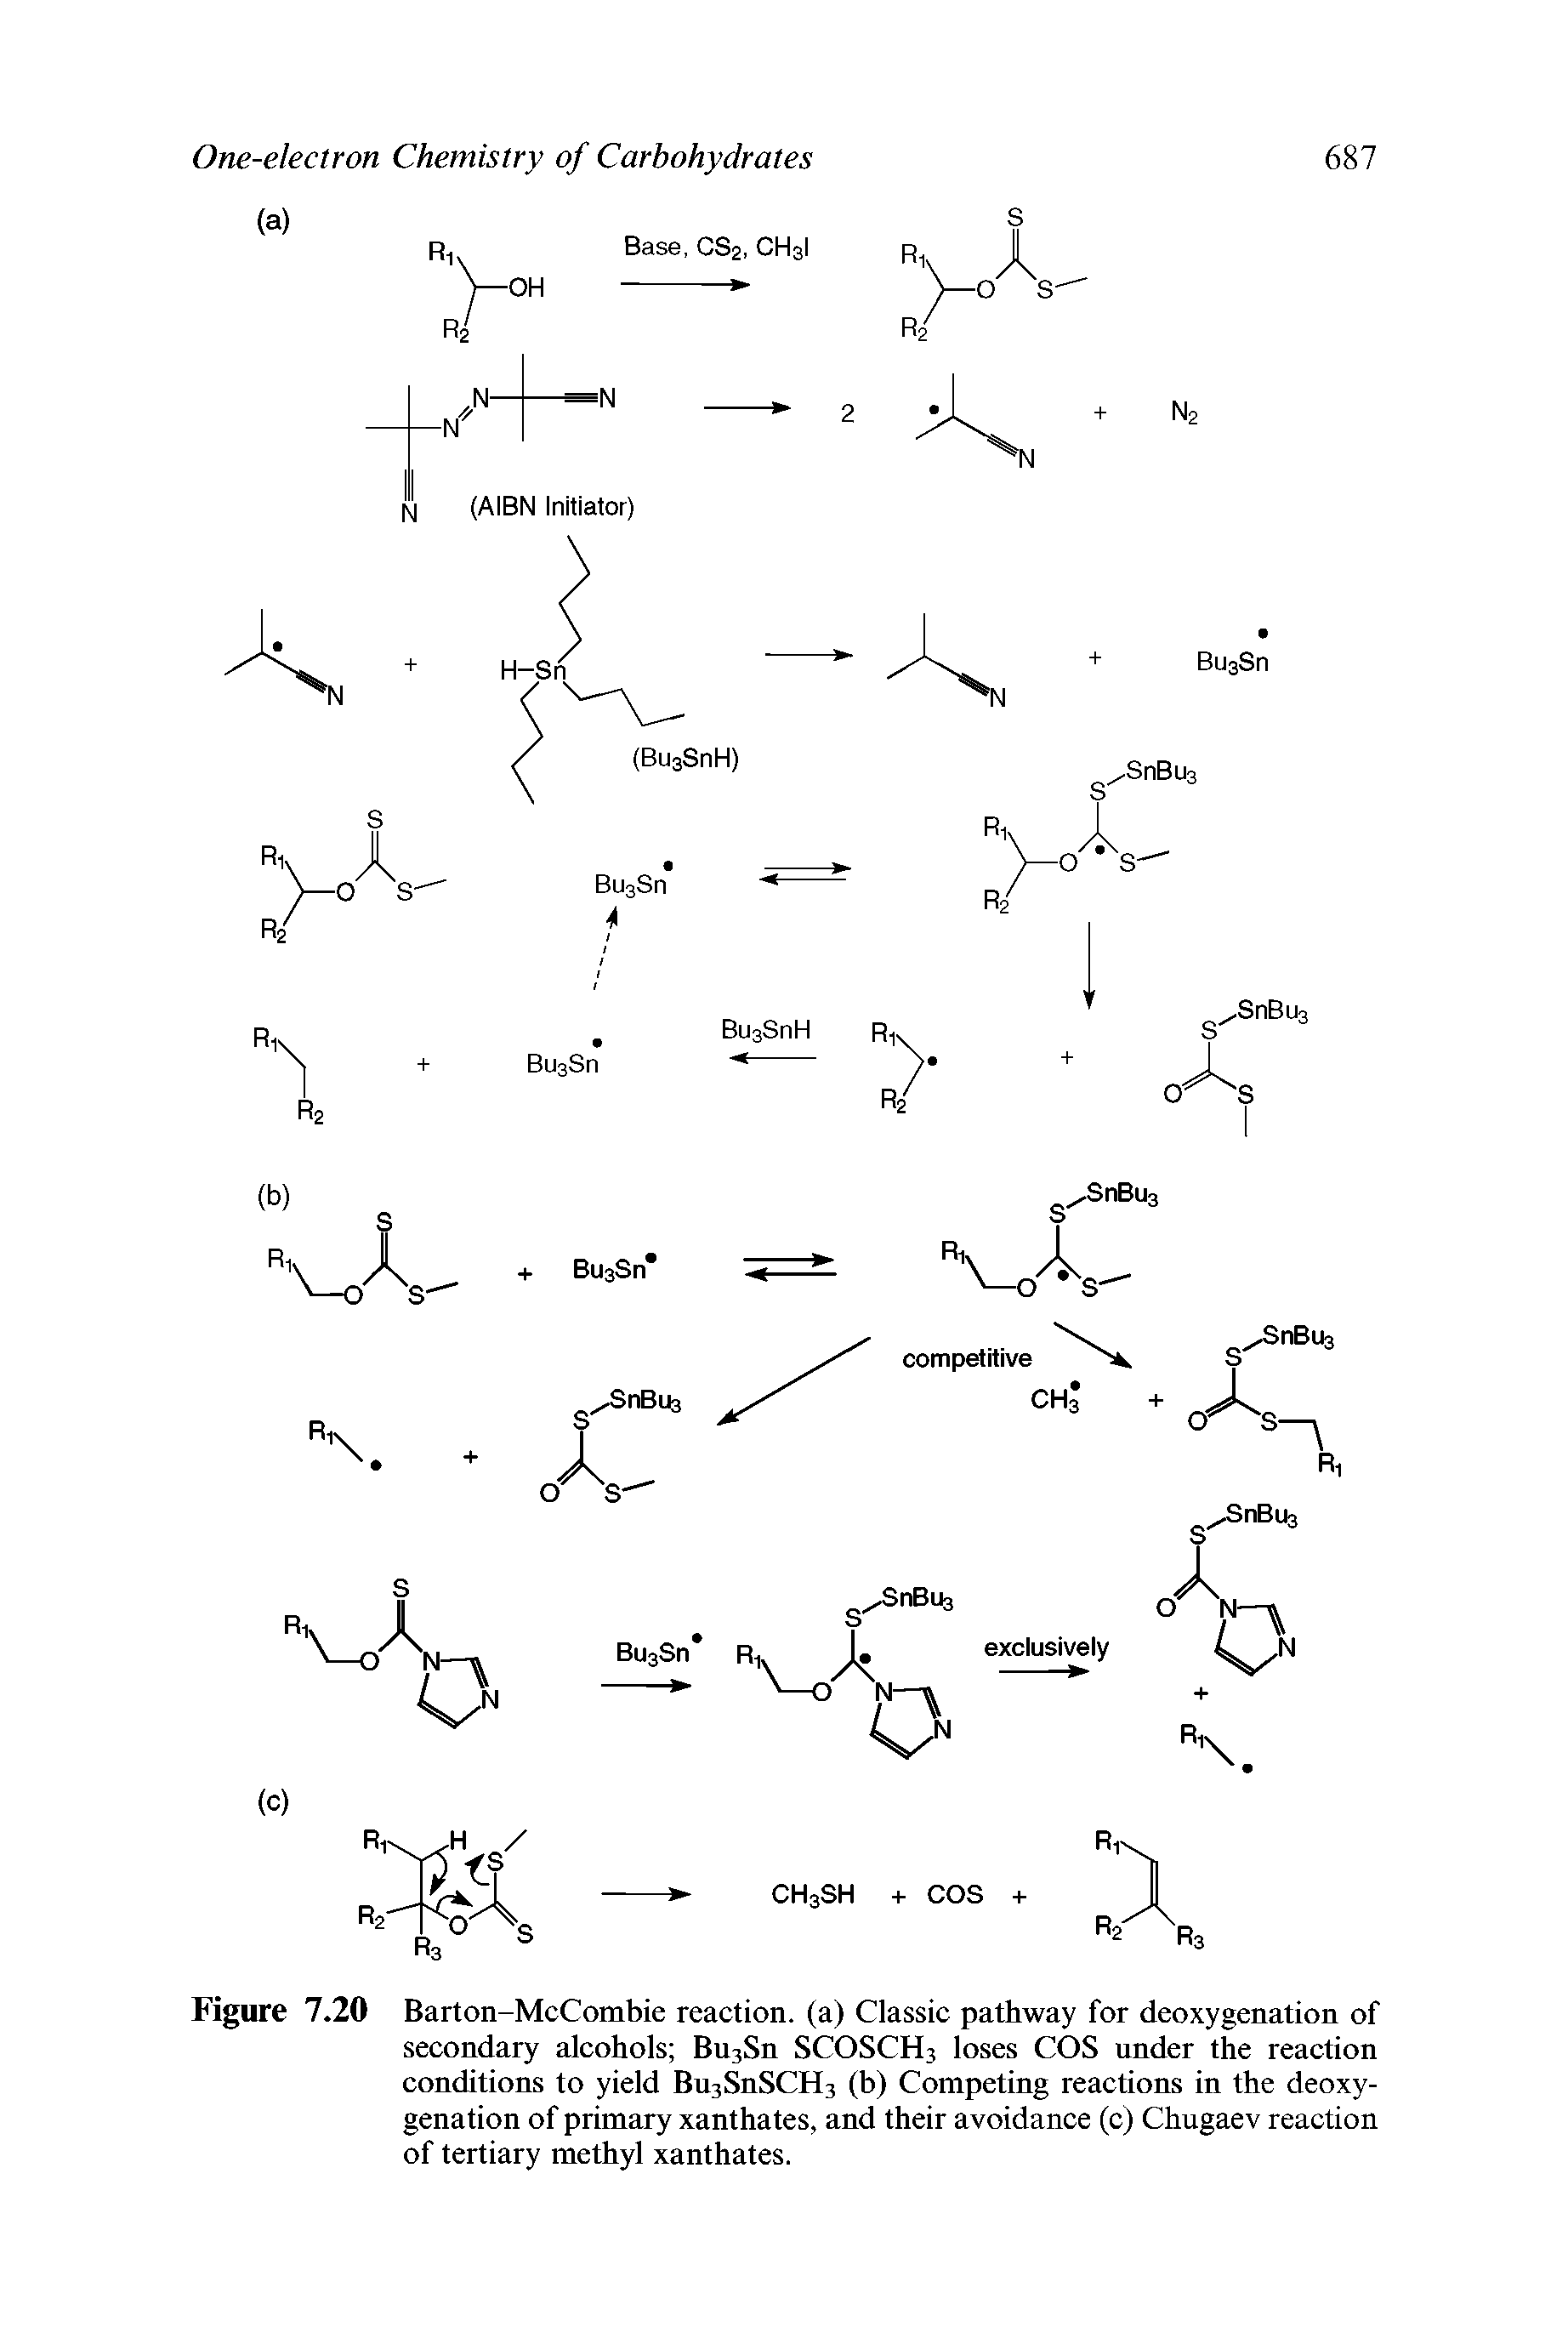 Figure 7.20 Barton-McCombie reaction, (a) Classic pathway for deoxygenation of secondary alcohols Bu3Sn SCOSCH3 loses COS under the reaction conditions to yield Bu3SnSCH3 (b) Competing reactions in the deoxygenation of primary xanthates, and their avoidance (c) Chugaev reaction of tertiary methyl xanthates.